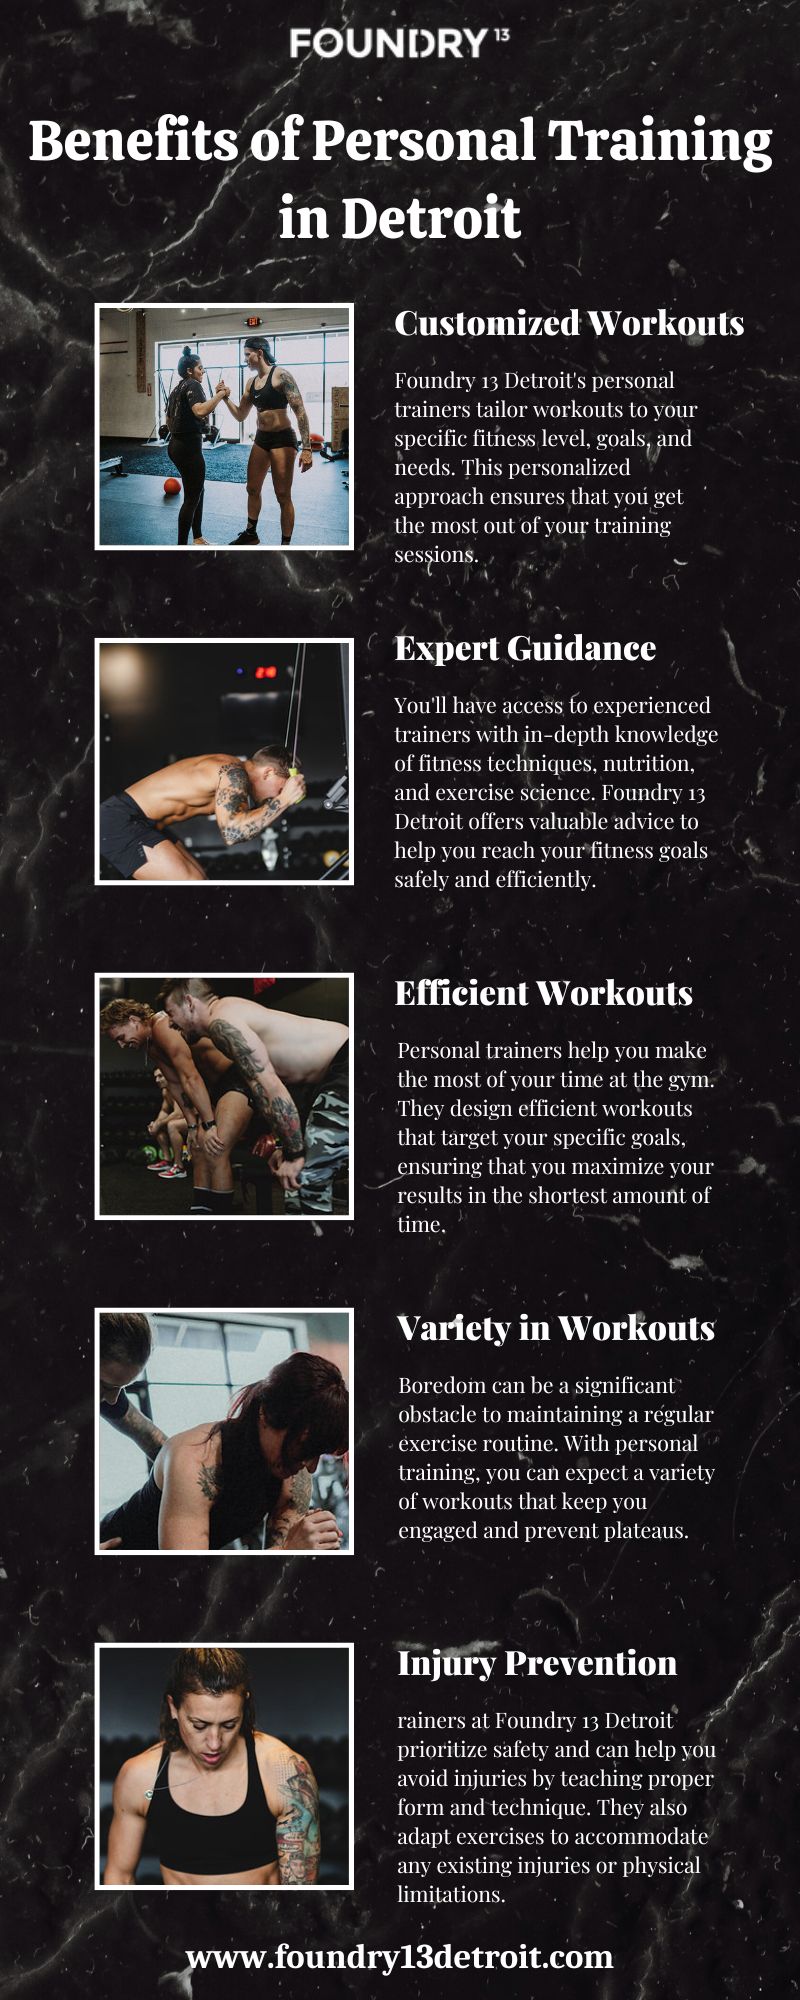 The Benefits of Having a Personal Trainer: Customized Workouts